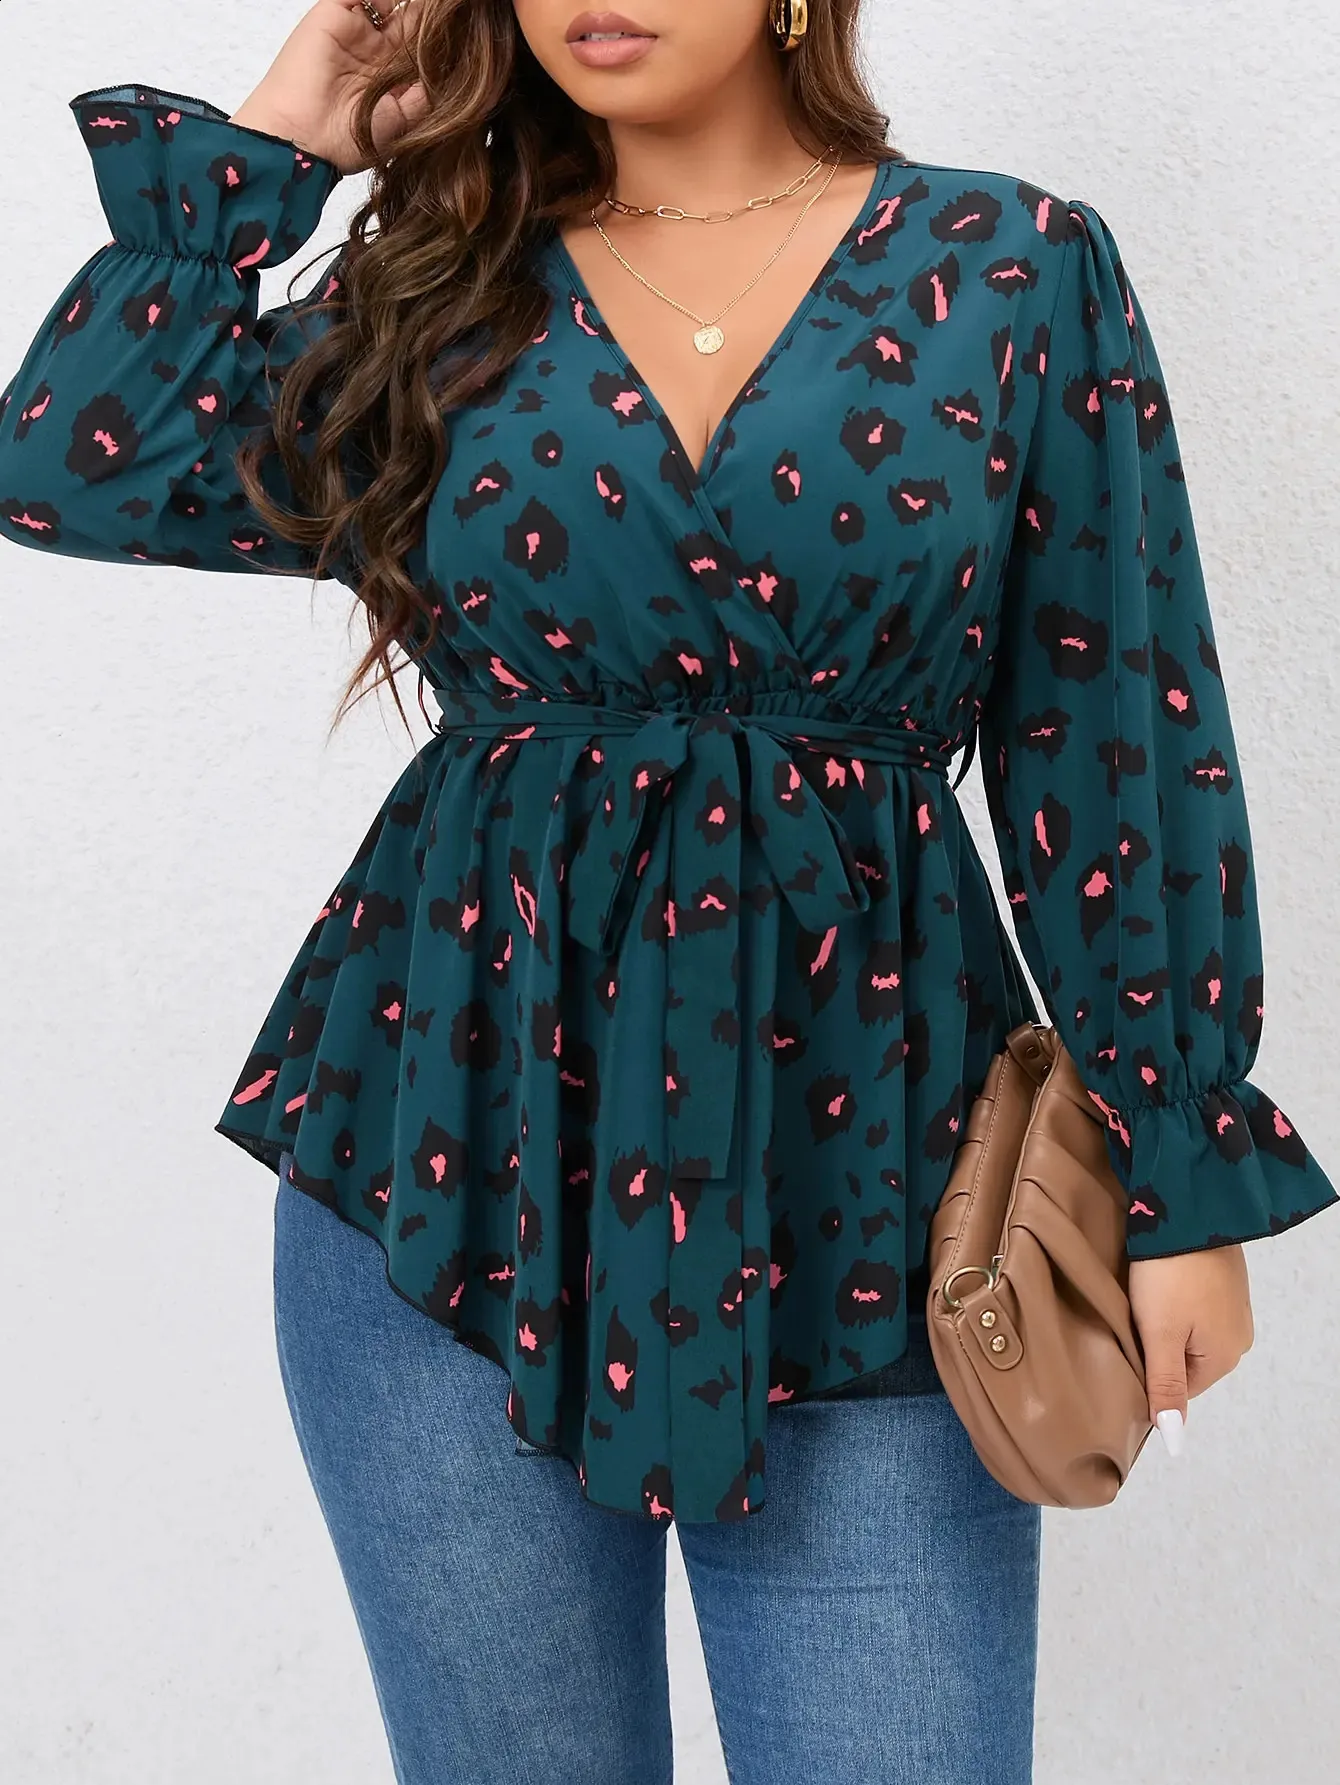 Finjani Plus Size Tops Casual Loose V-neck Women Blouses High-quality Polyester T-shirts Multiple Colors Available 240130